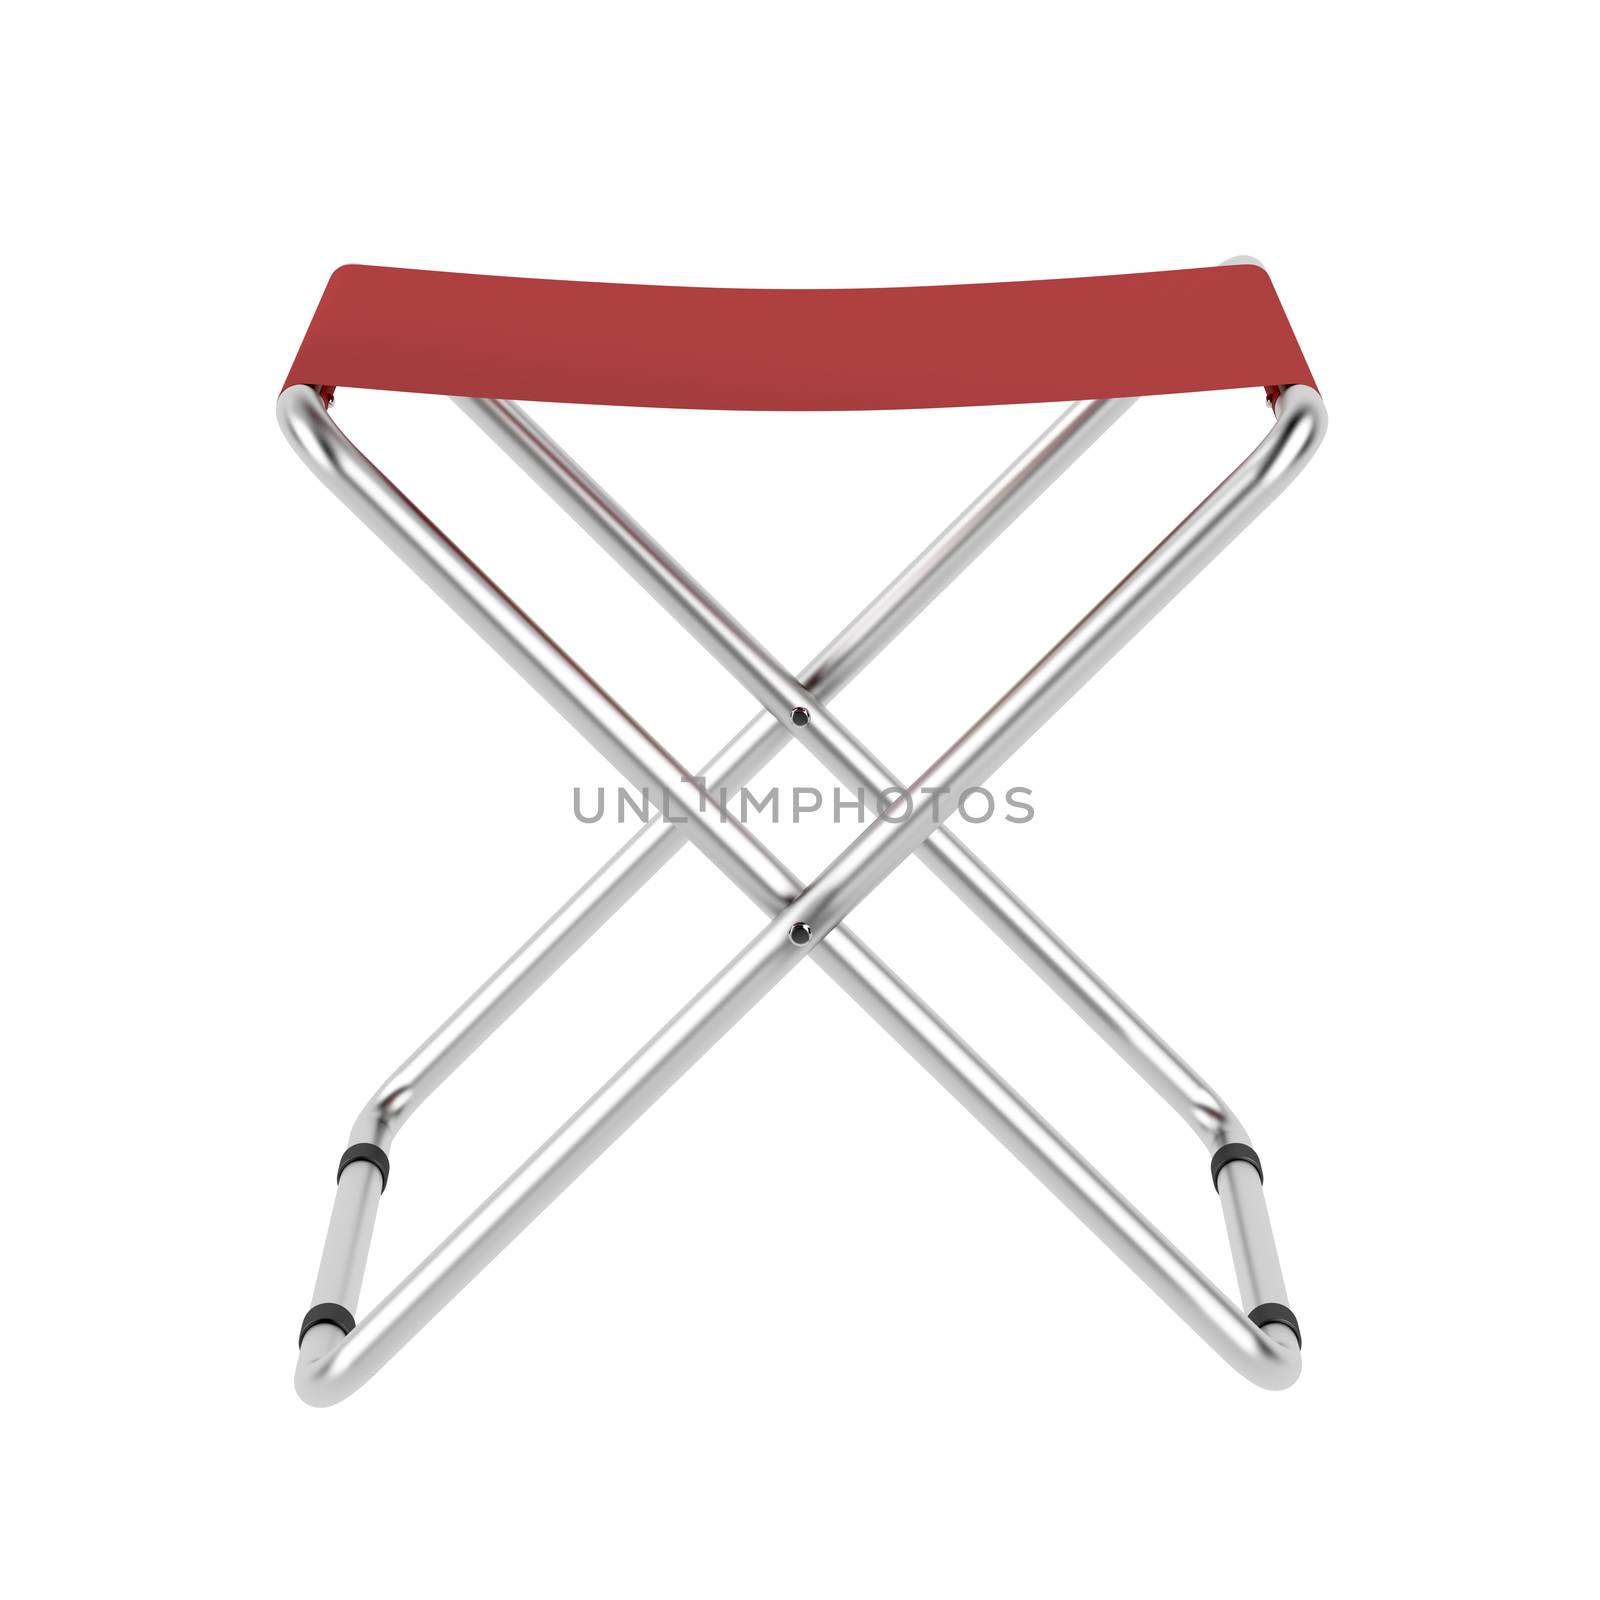 Folding chair isolated on white background